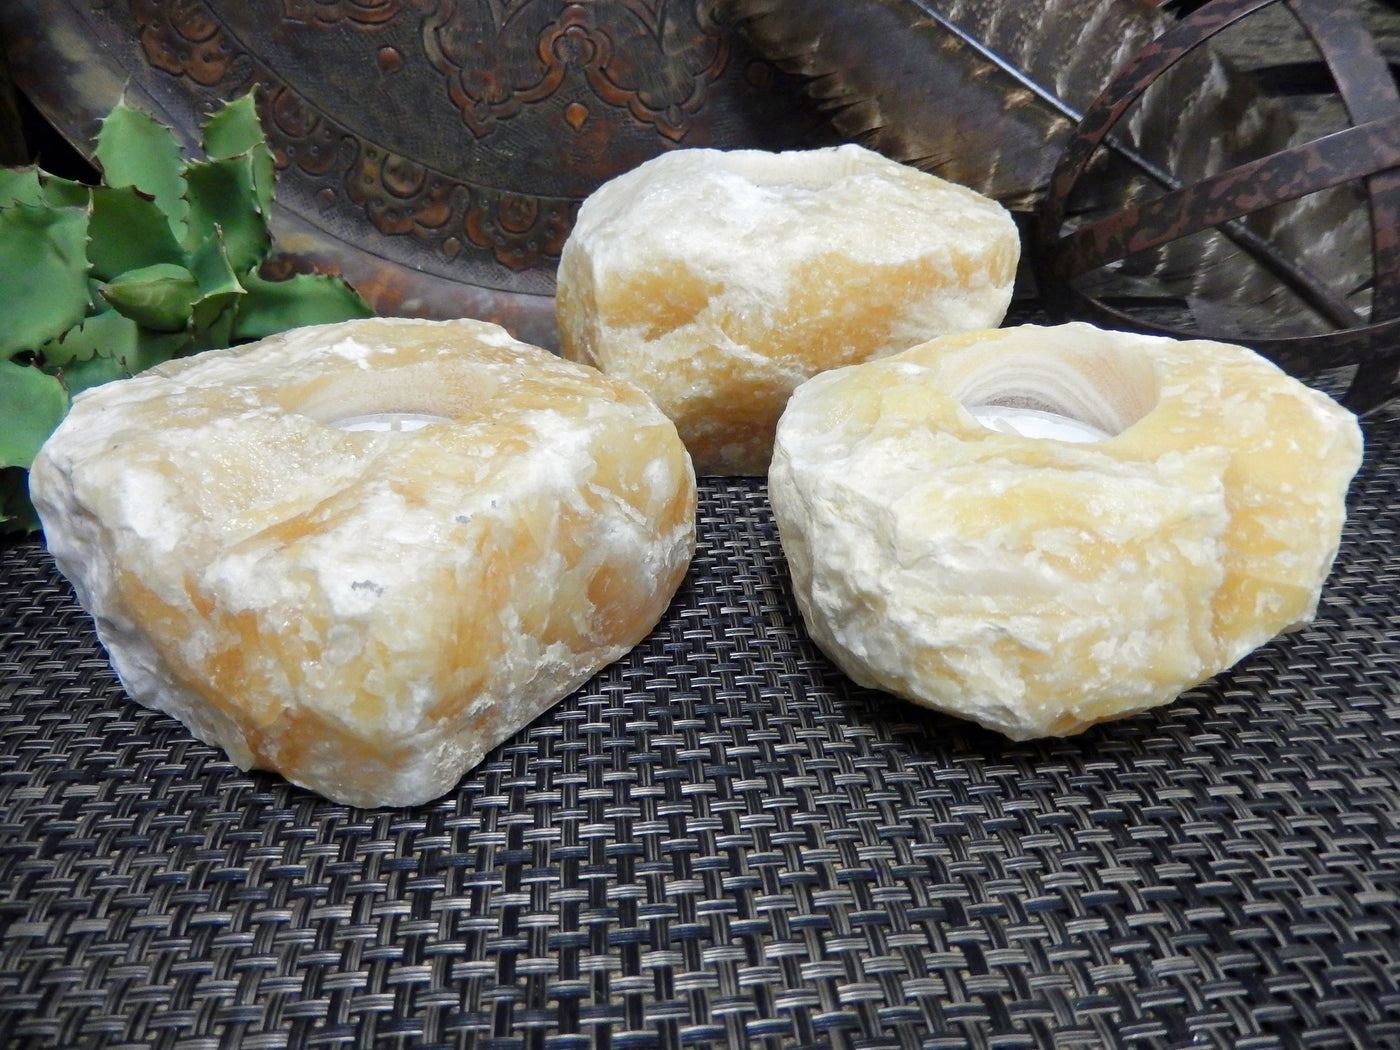 3 Mexican Orange Calcite Candle Holders from a side view